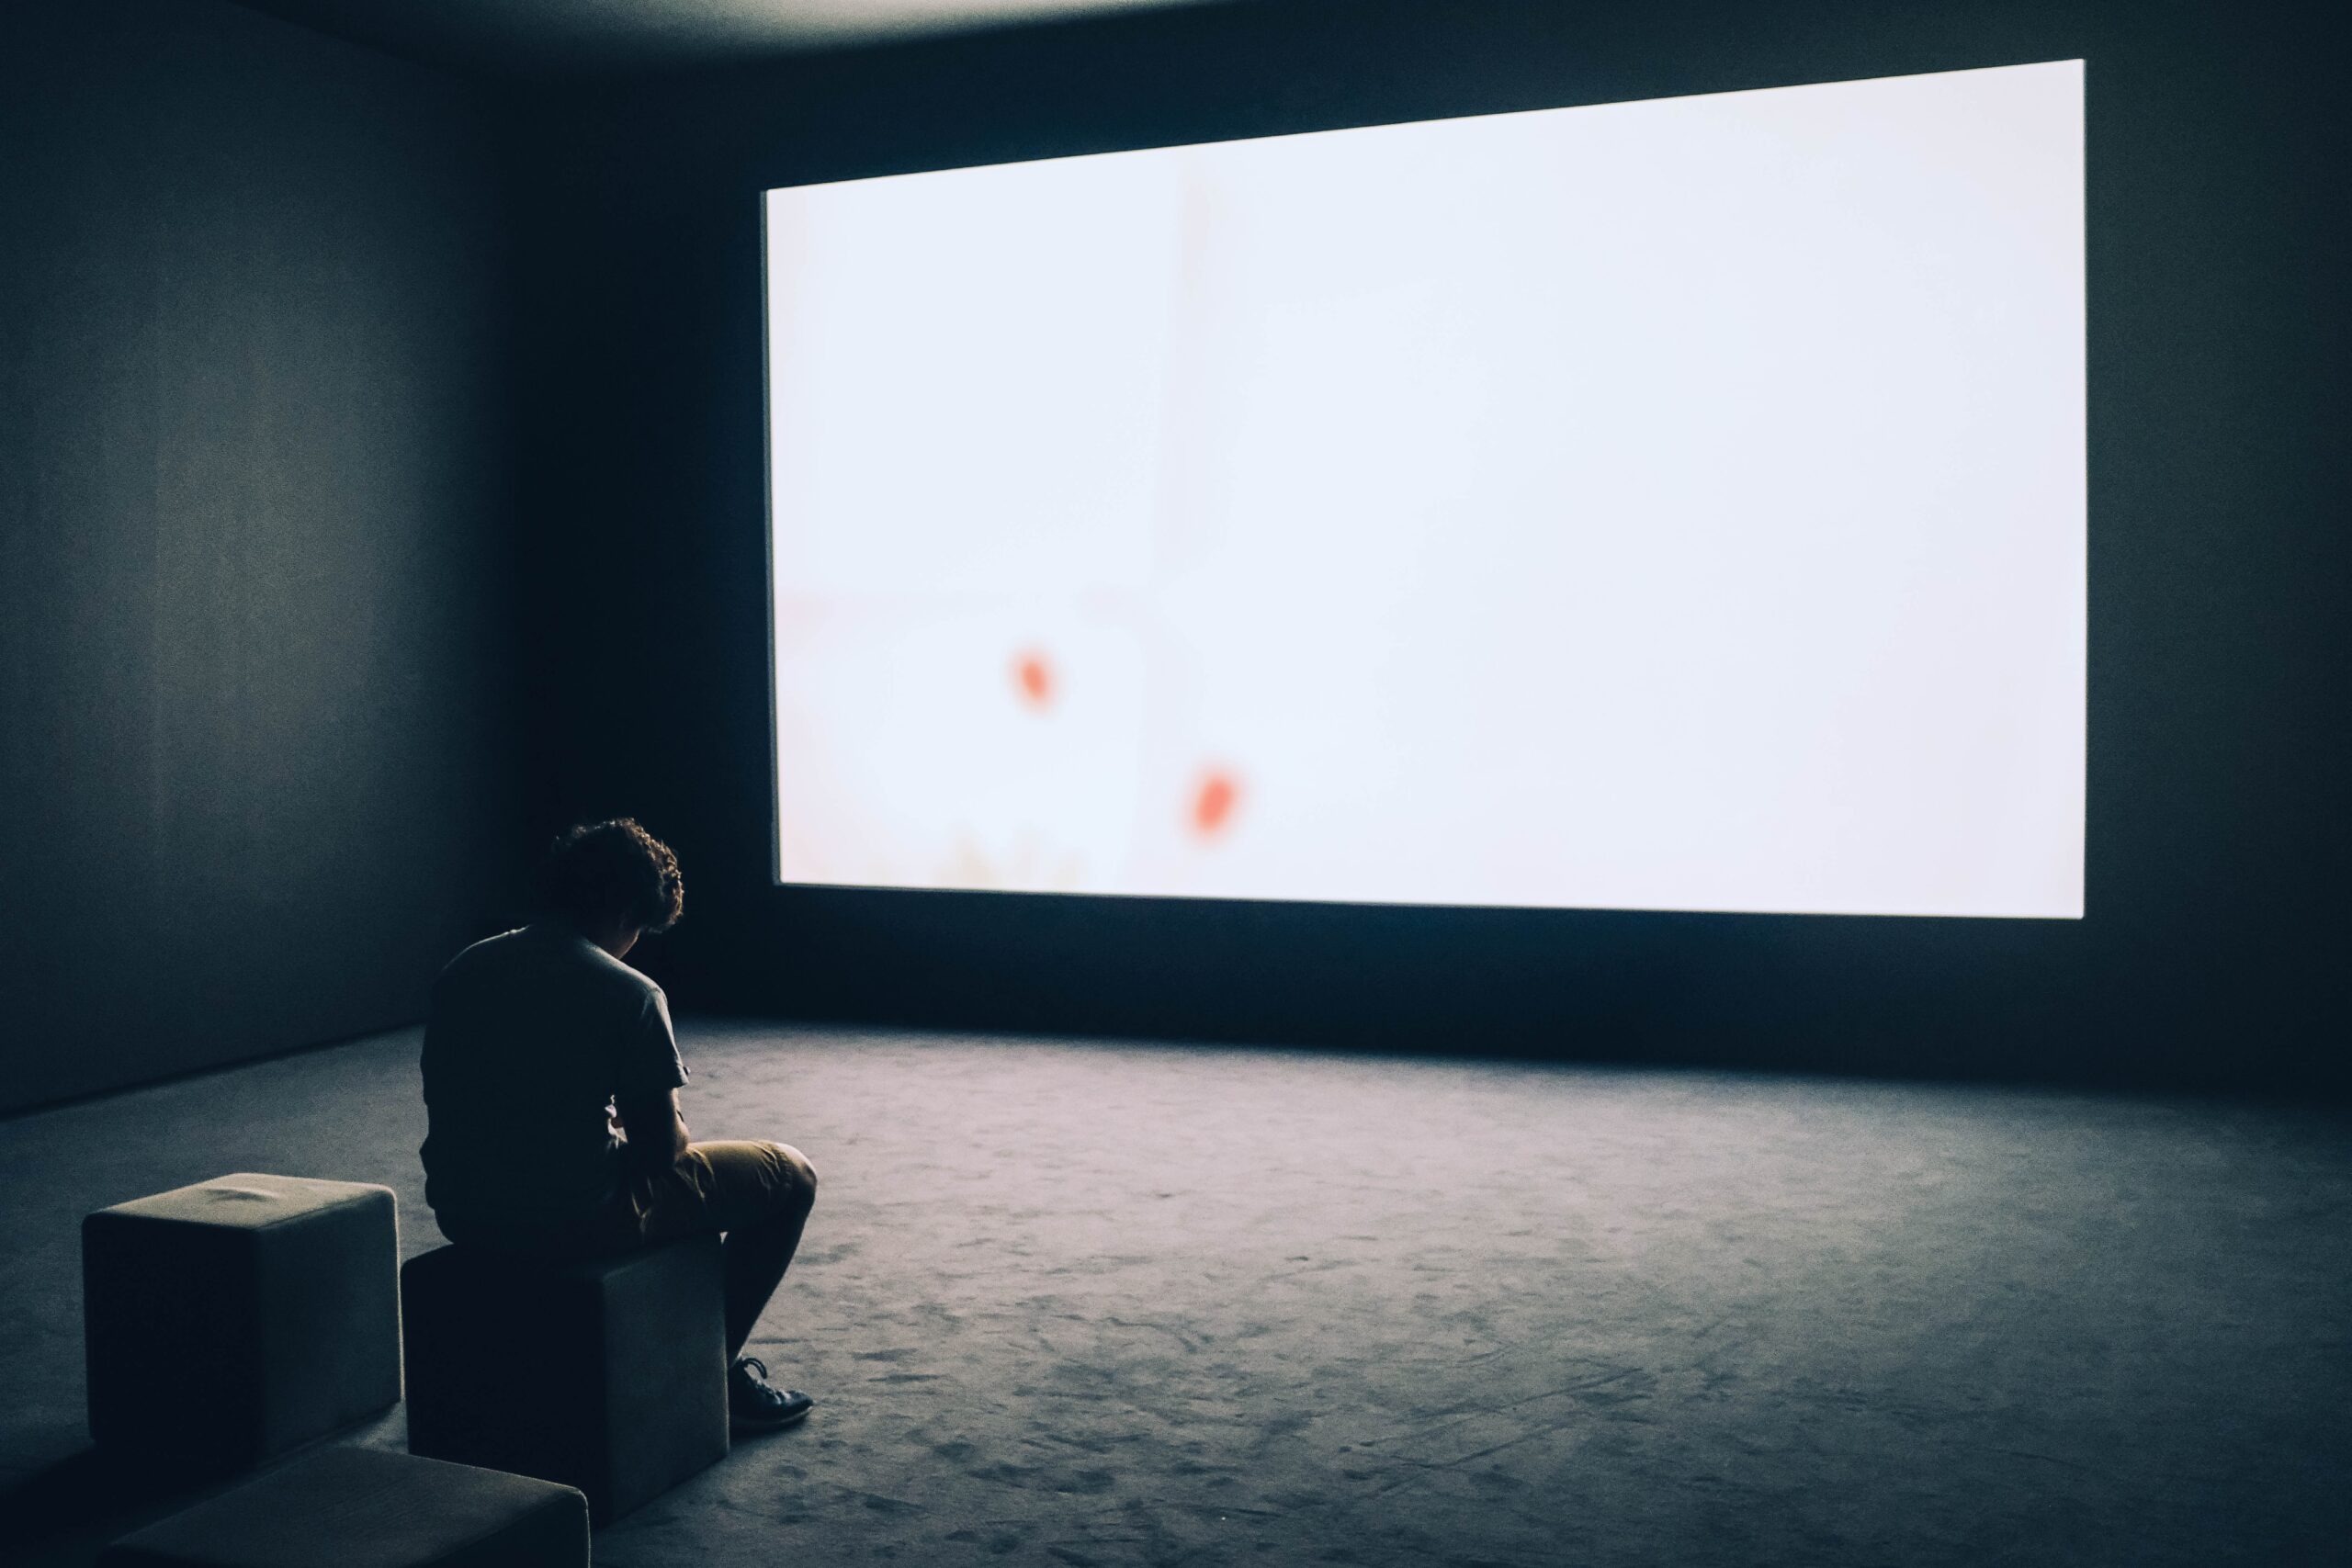 6 Simple Solutions When Your Projector Is Not Displaying